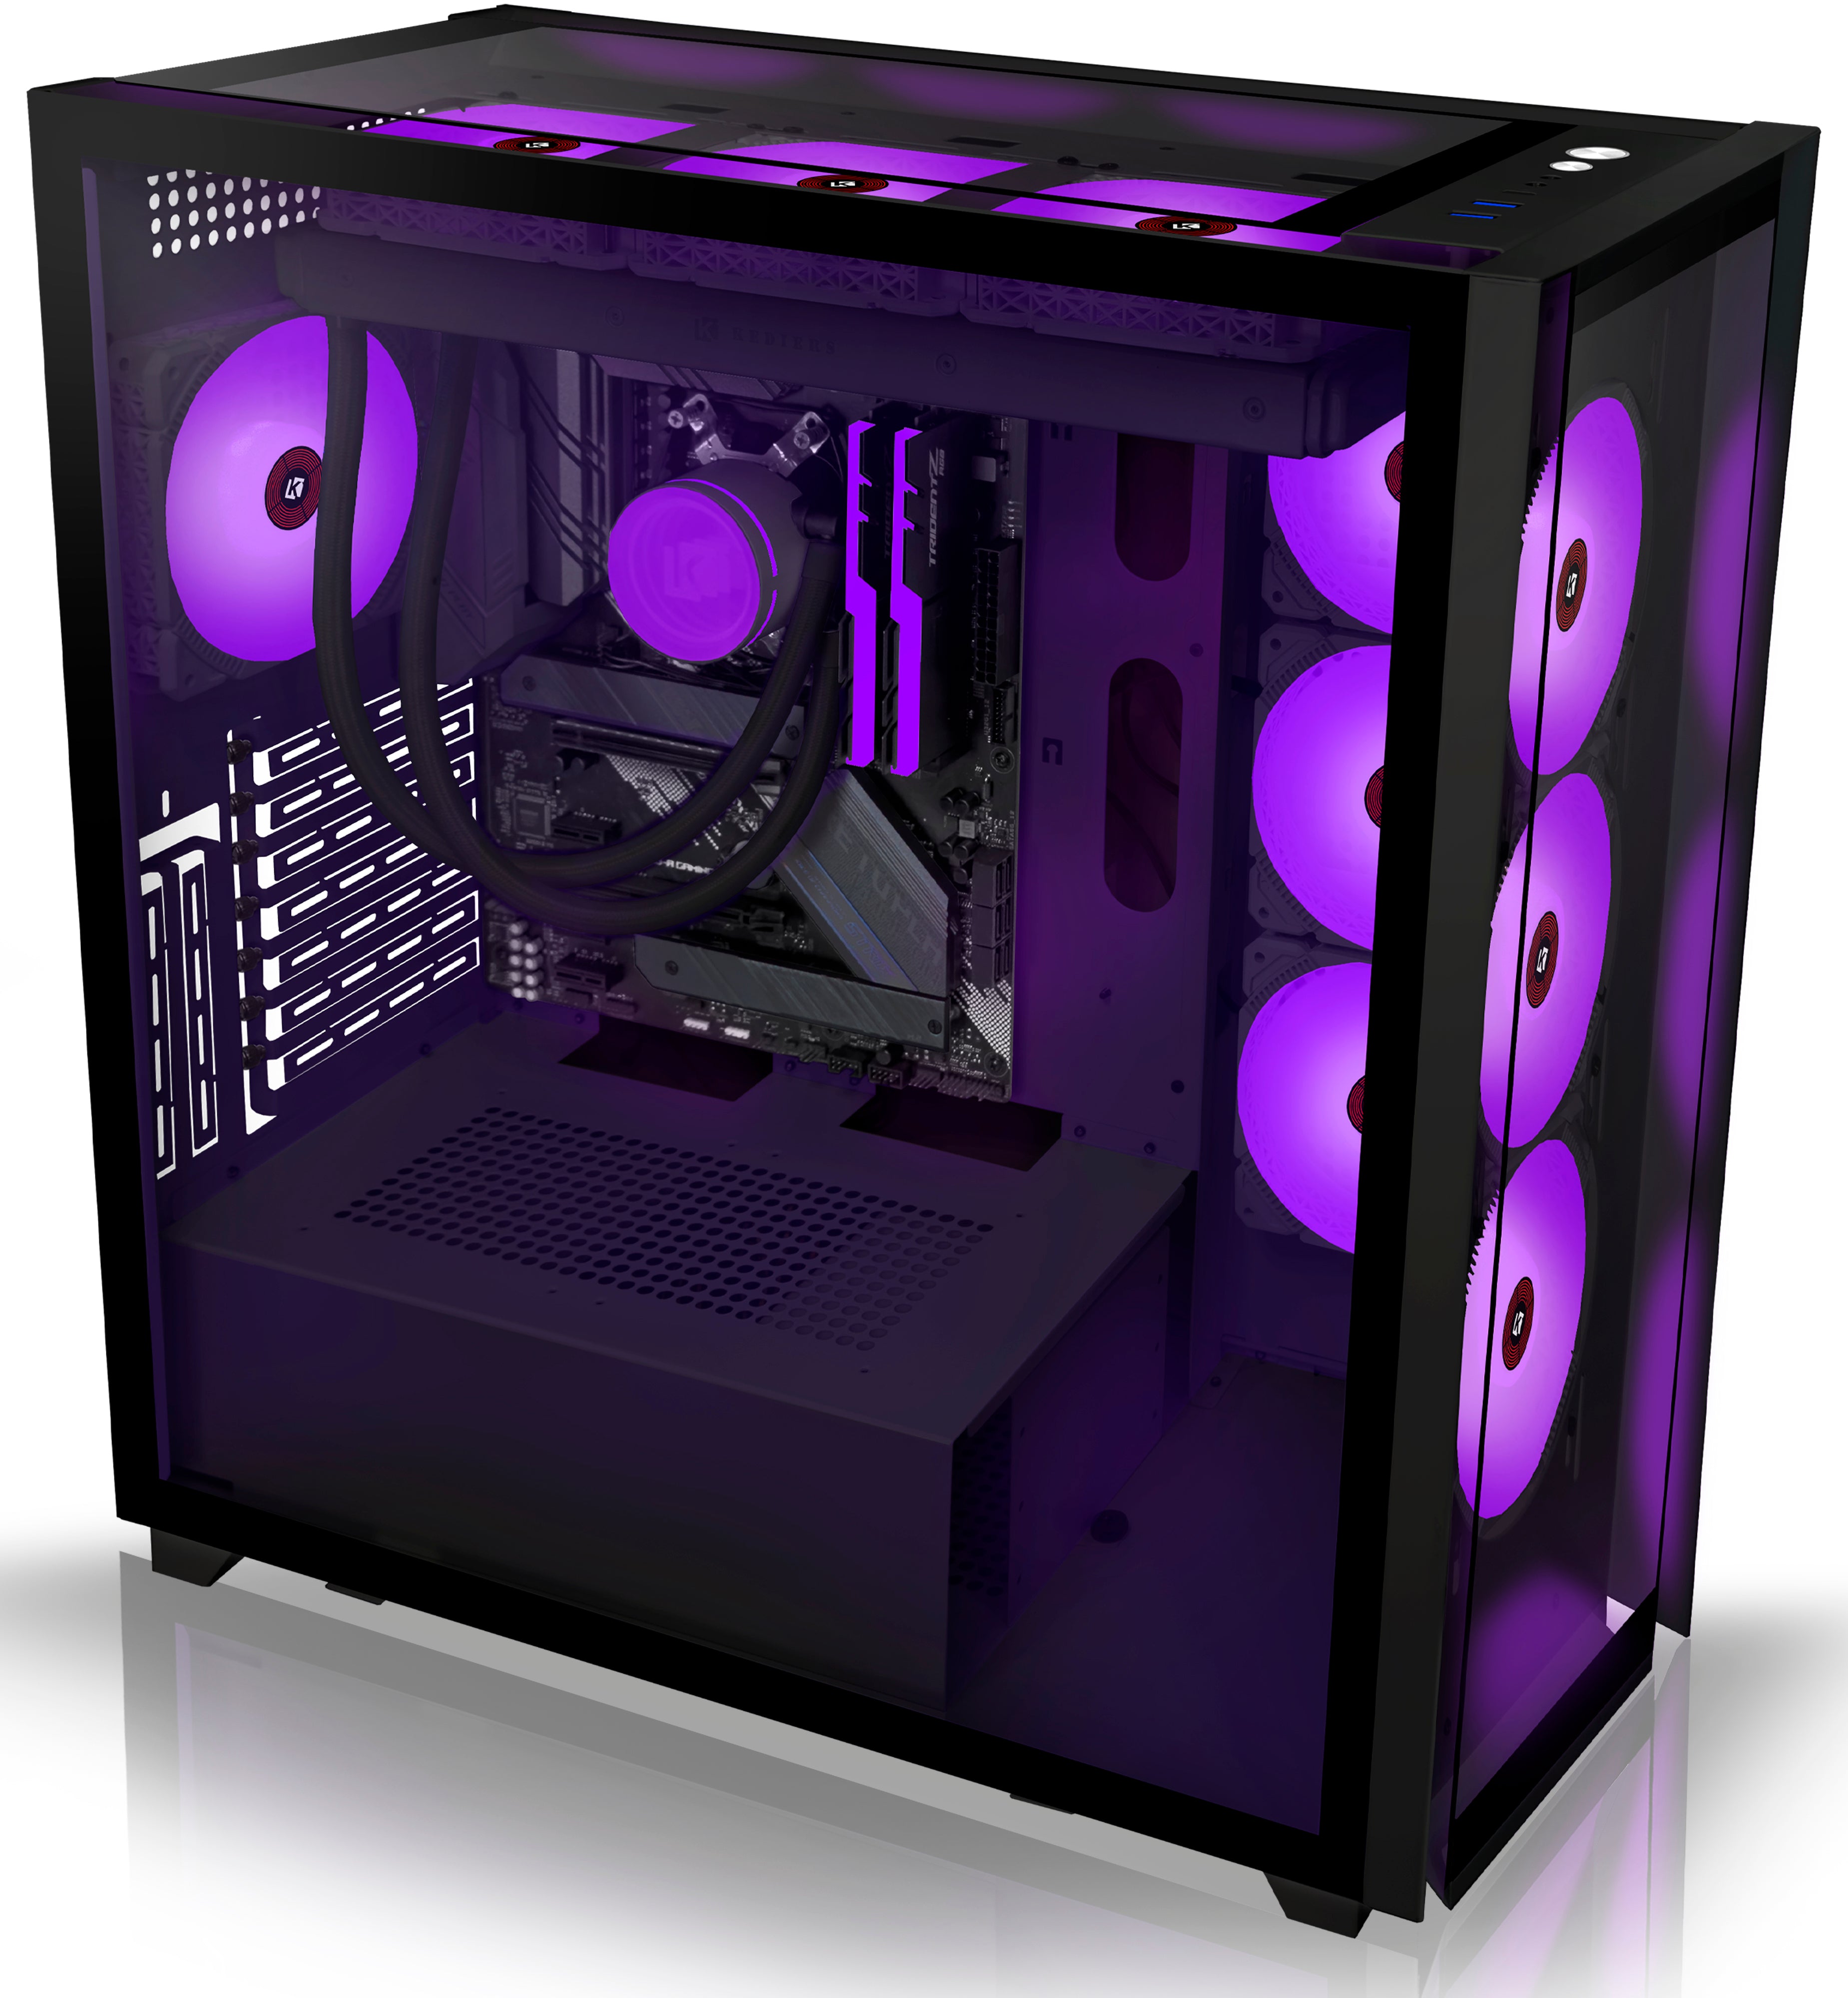 KEDIERS PC Case - C700 E-ATX Tower 3*Tempered Glass Gaming Computer Ca